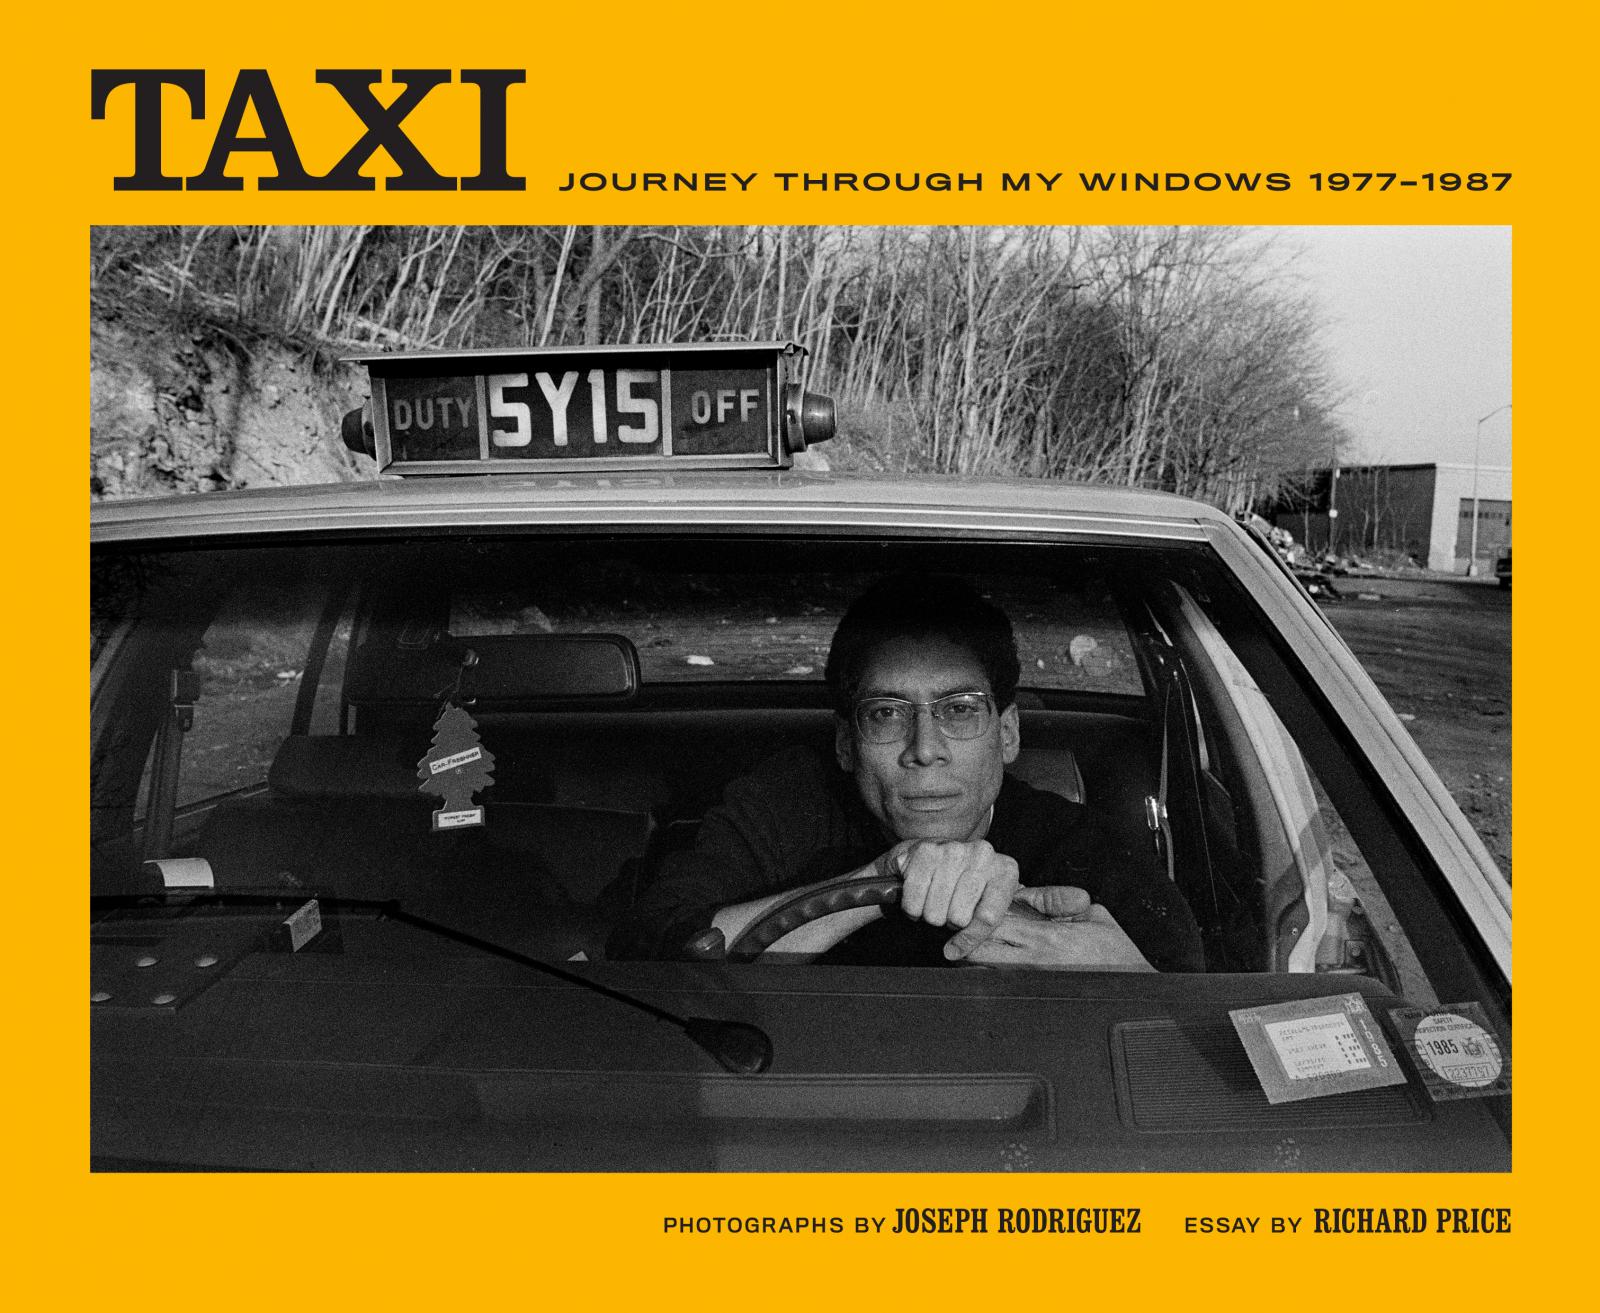 Thumbnail of Richard Price's essay in TAXI featured in The Telegraph